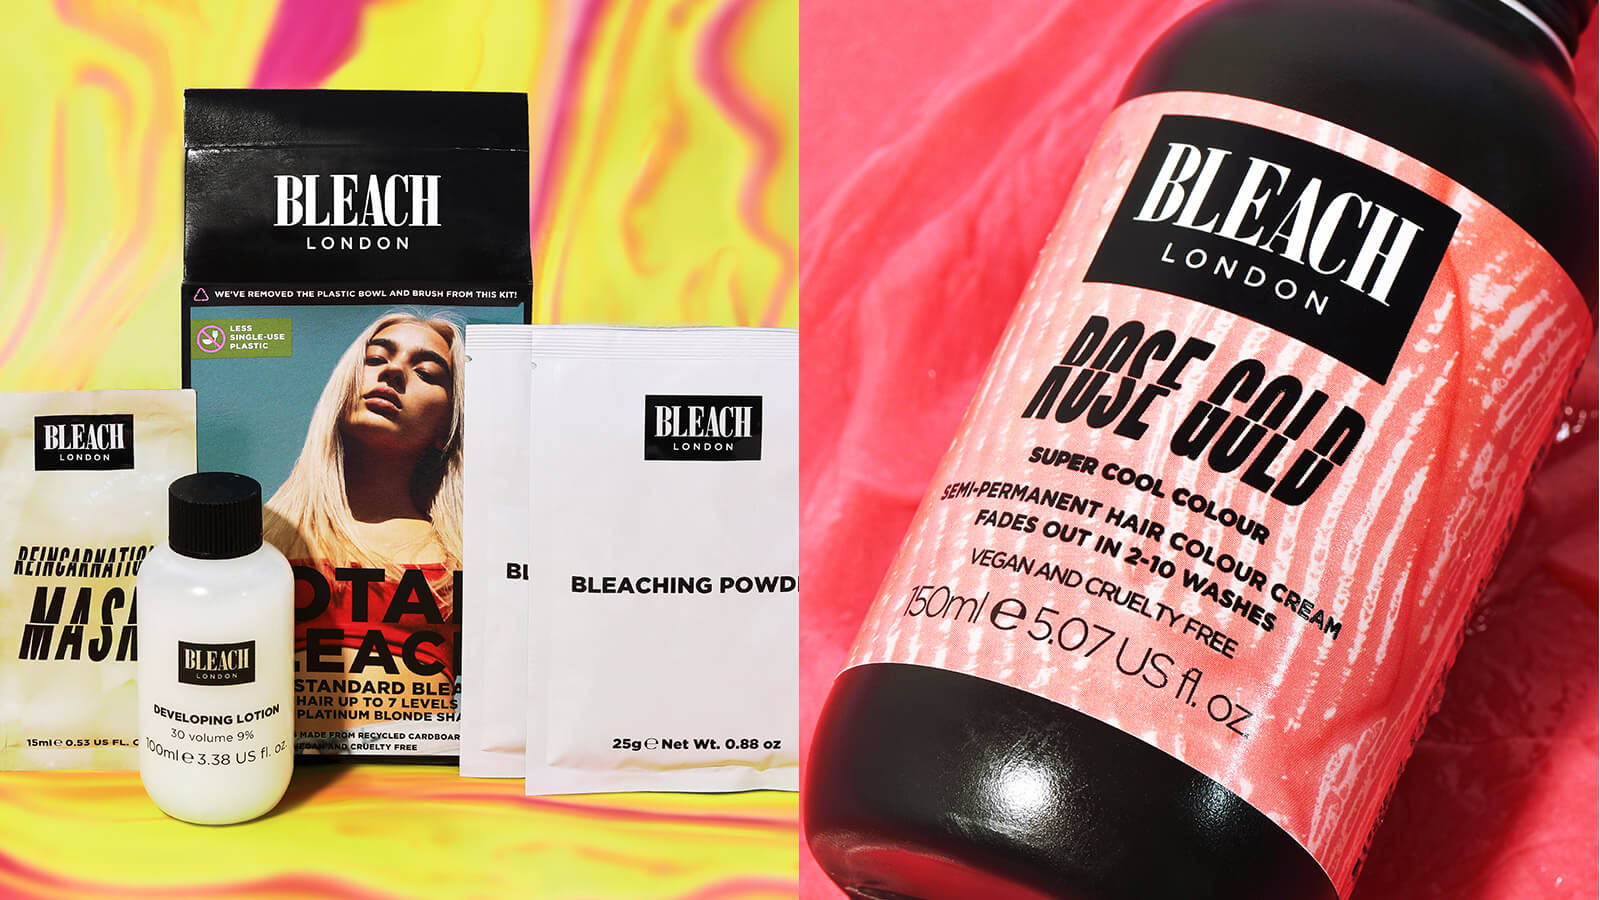 Can't Get To The Salon? Bleach London Have Got You Covered - Beauty Bay  Edited